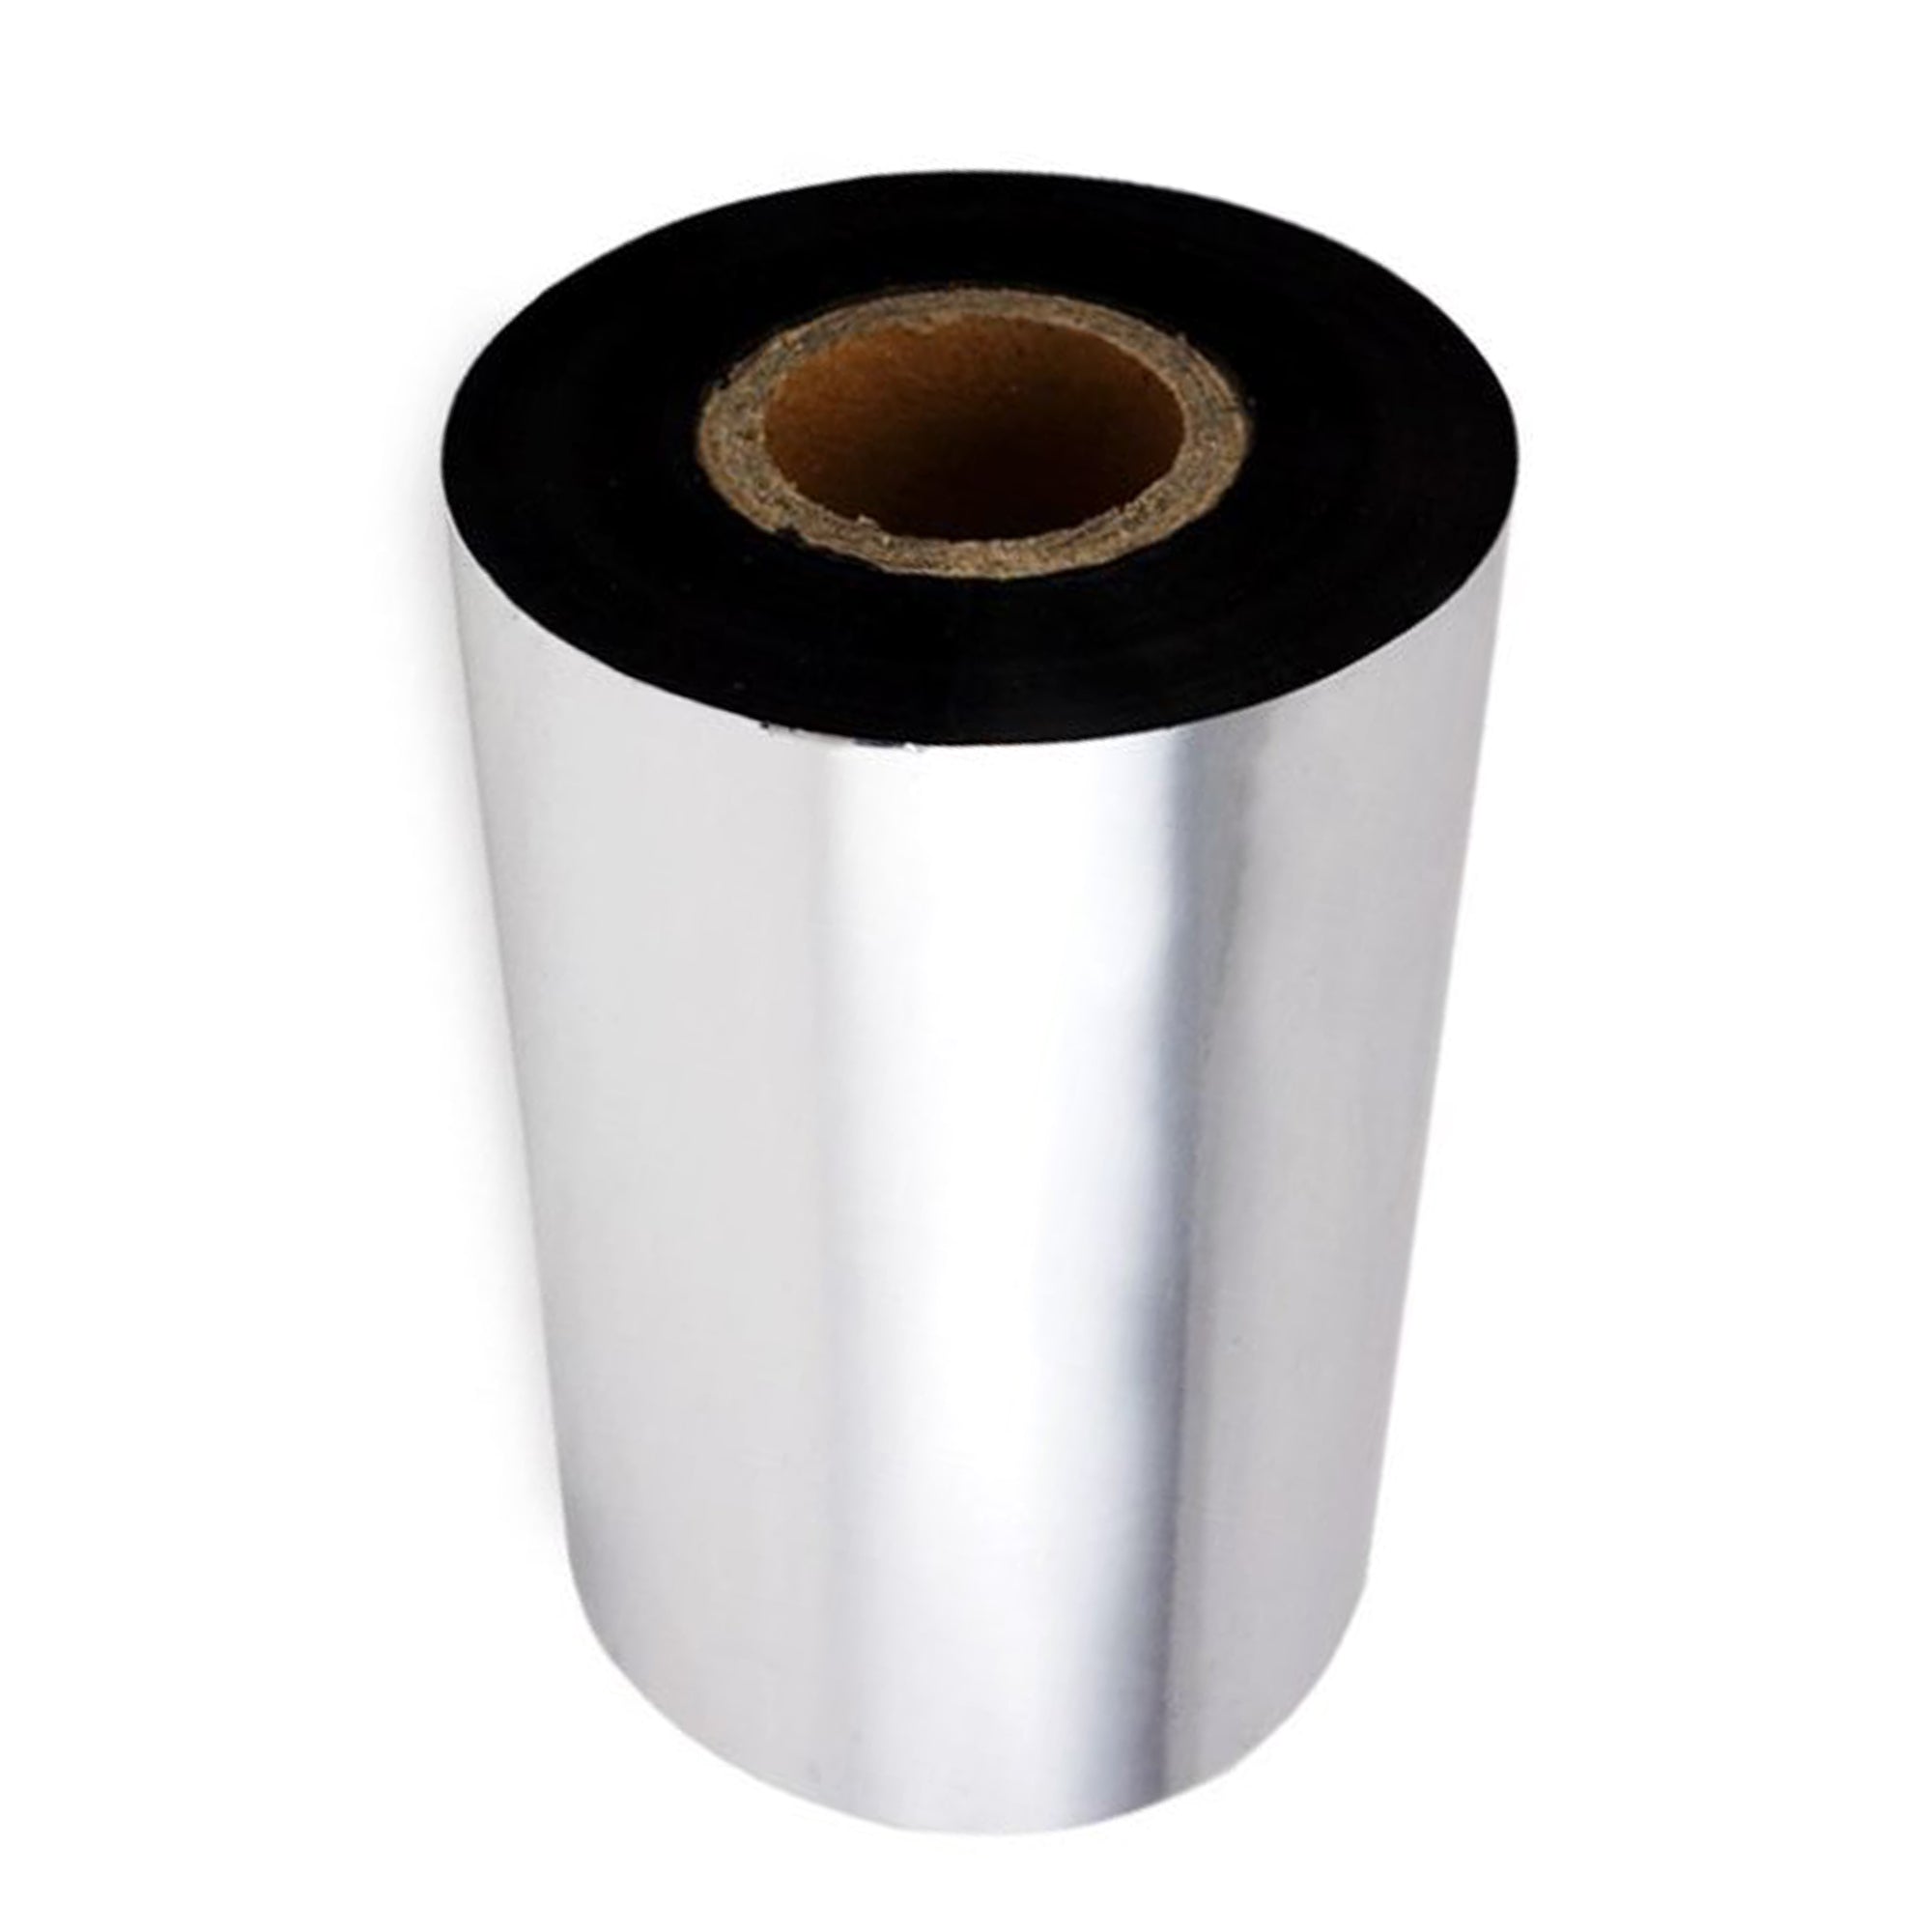 How to Buy the Correct Thermal Transfer Ribbons to Suit your Business?